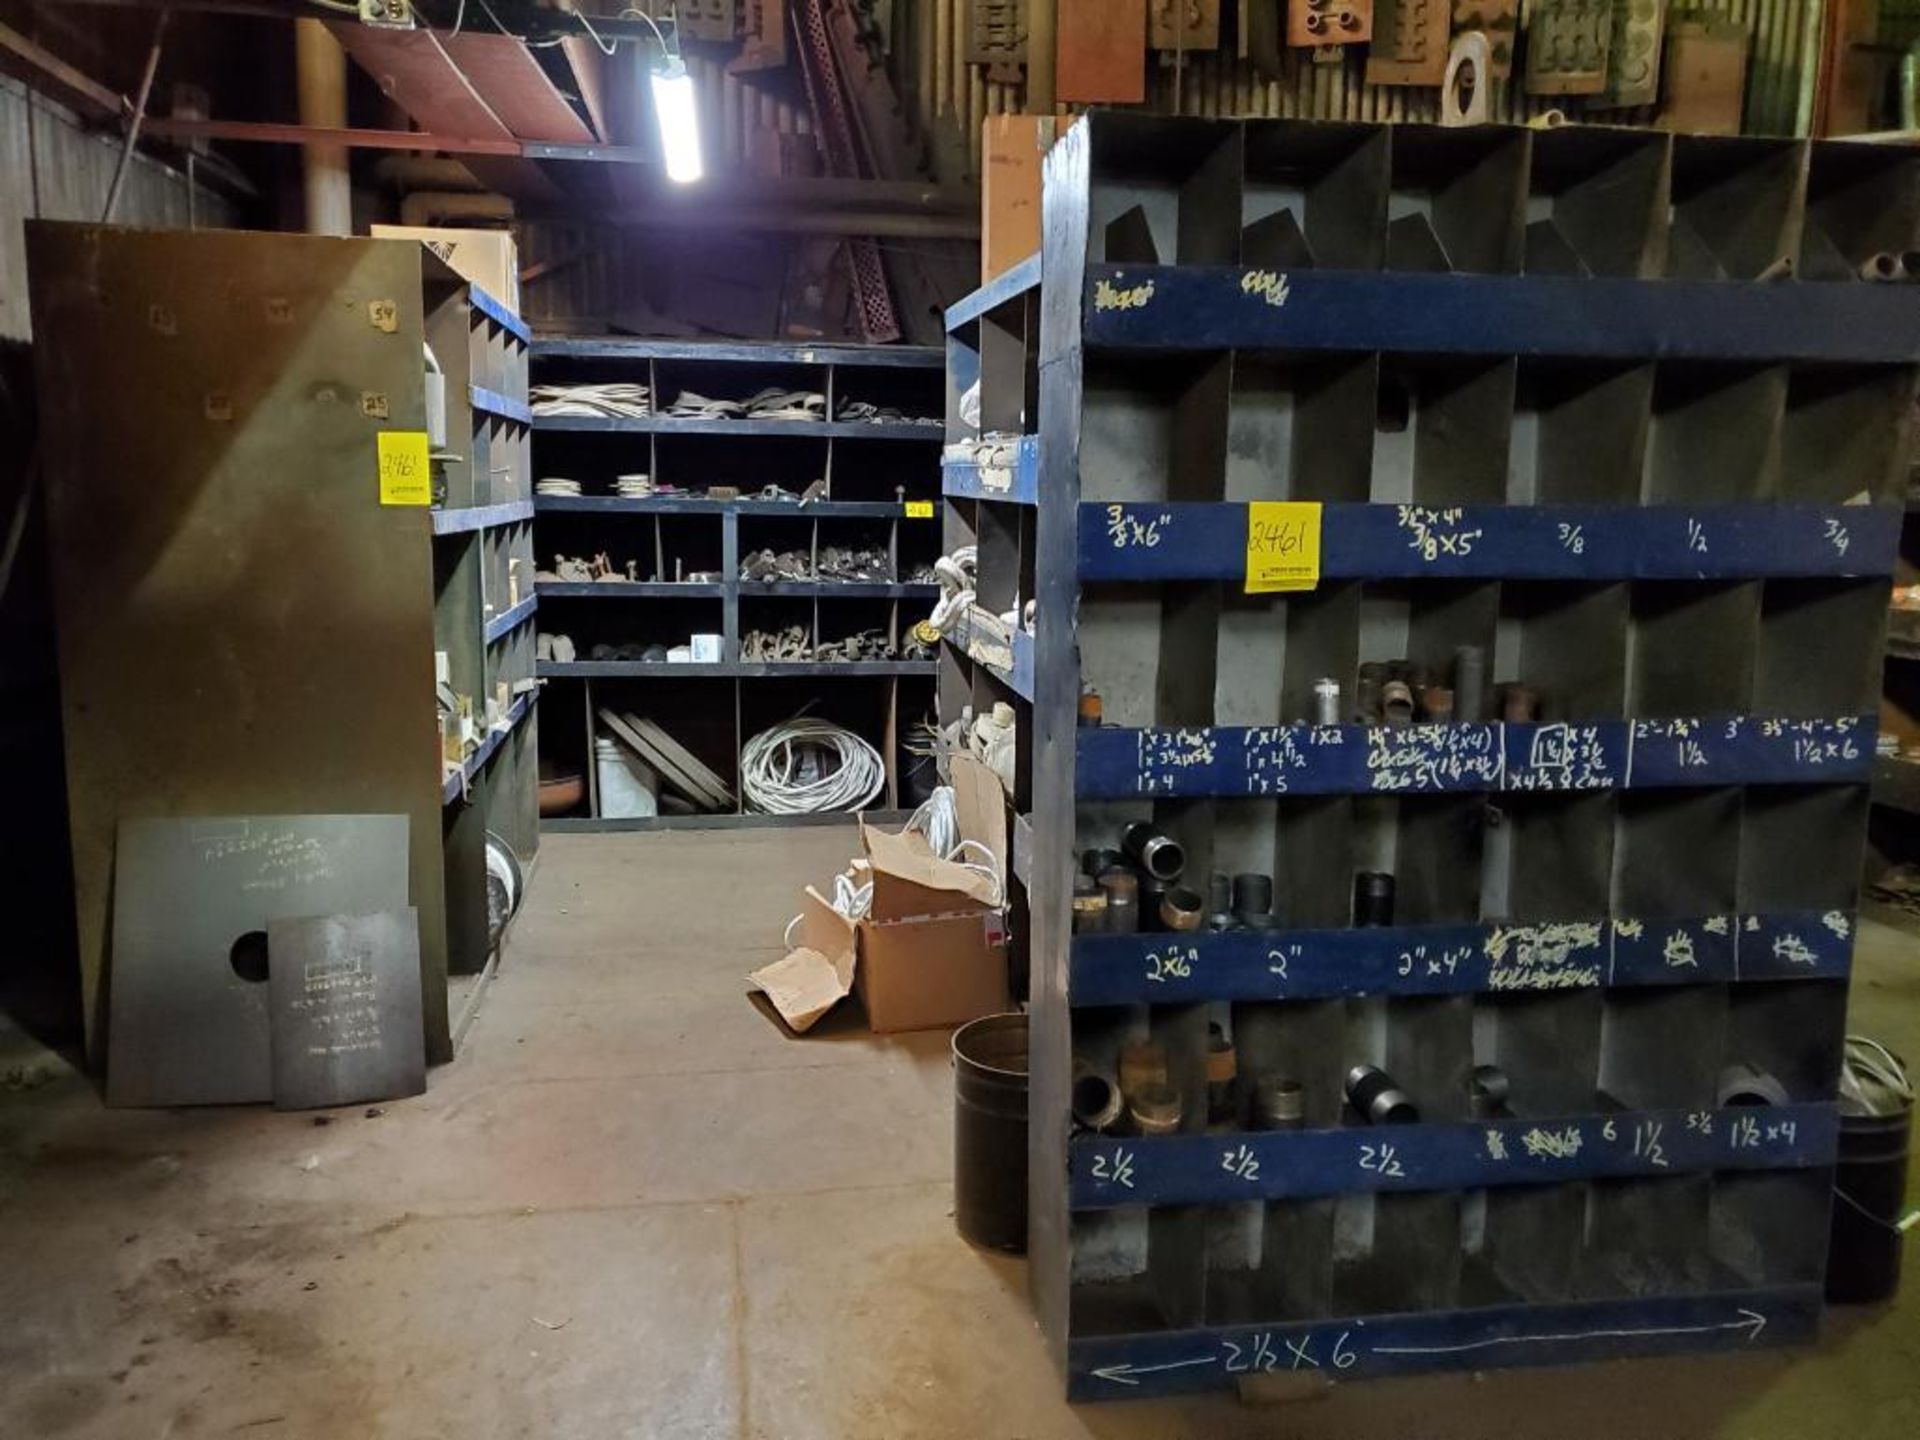 LARGE QUANTITY OF PIPE FITTINGS, FUSES, CHILL RINGS, PLANT SUPPORT AND SHELVING UNITS - Bild 5 aus 25